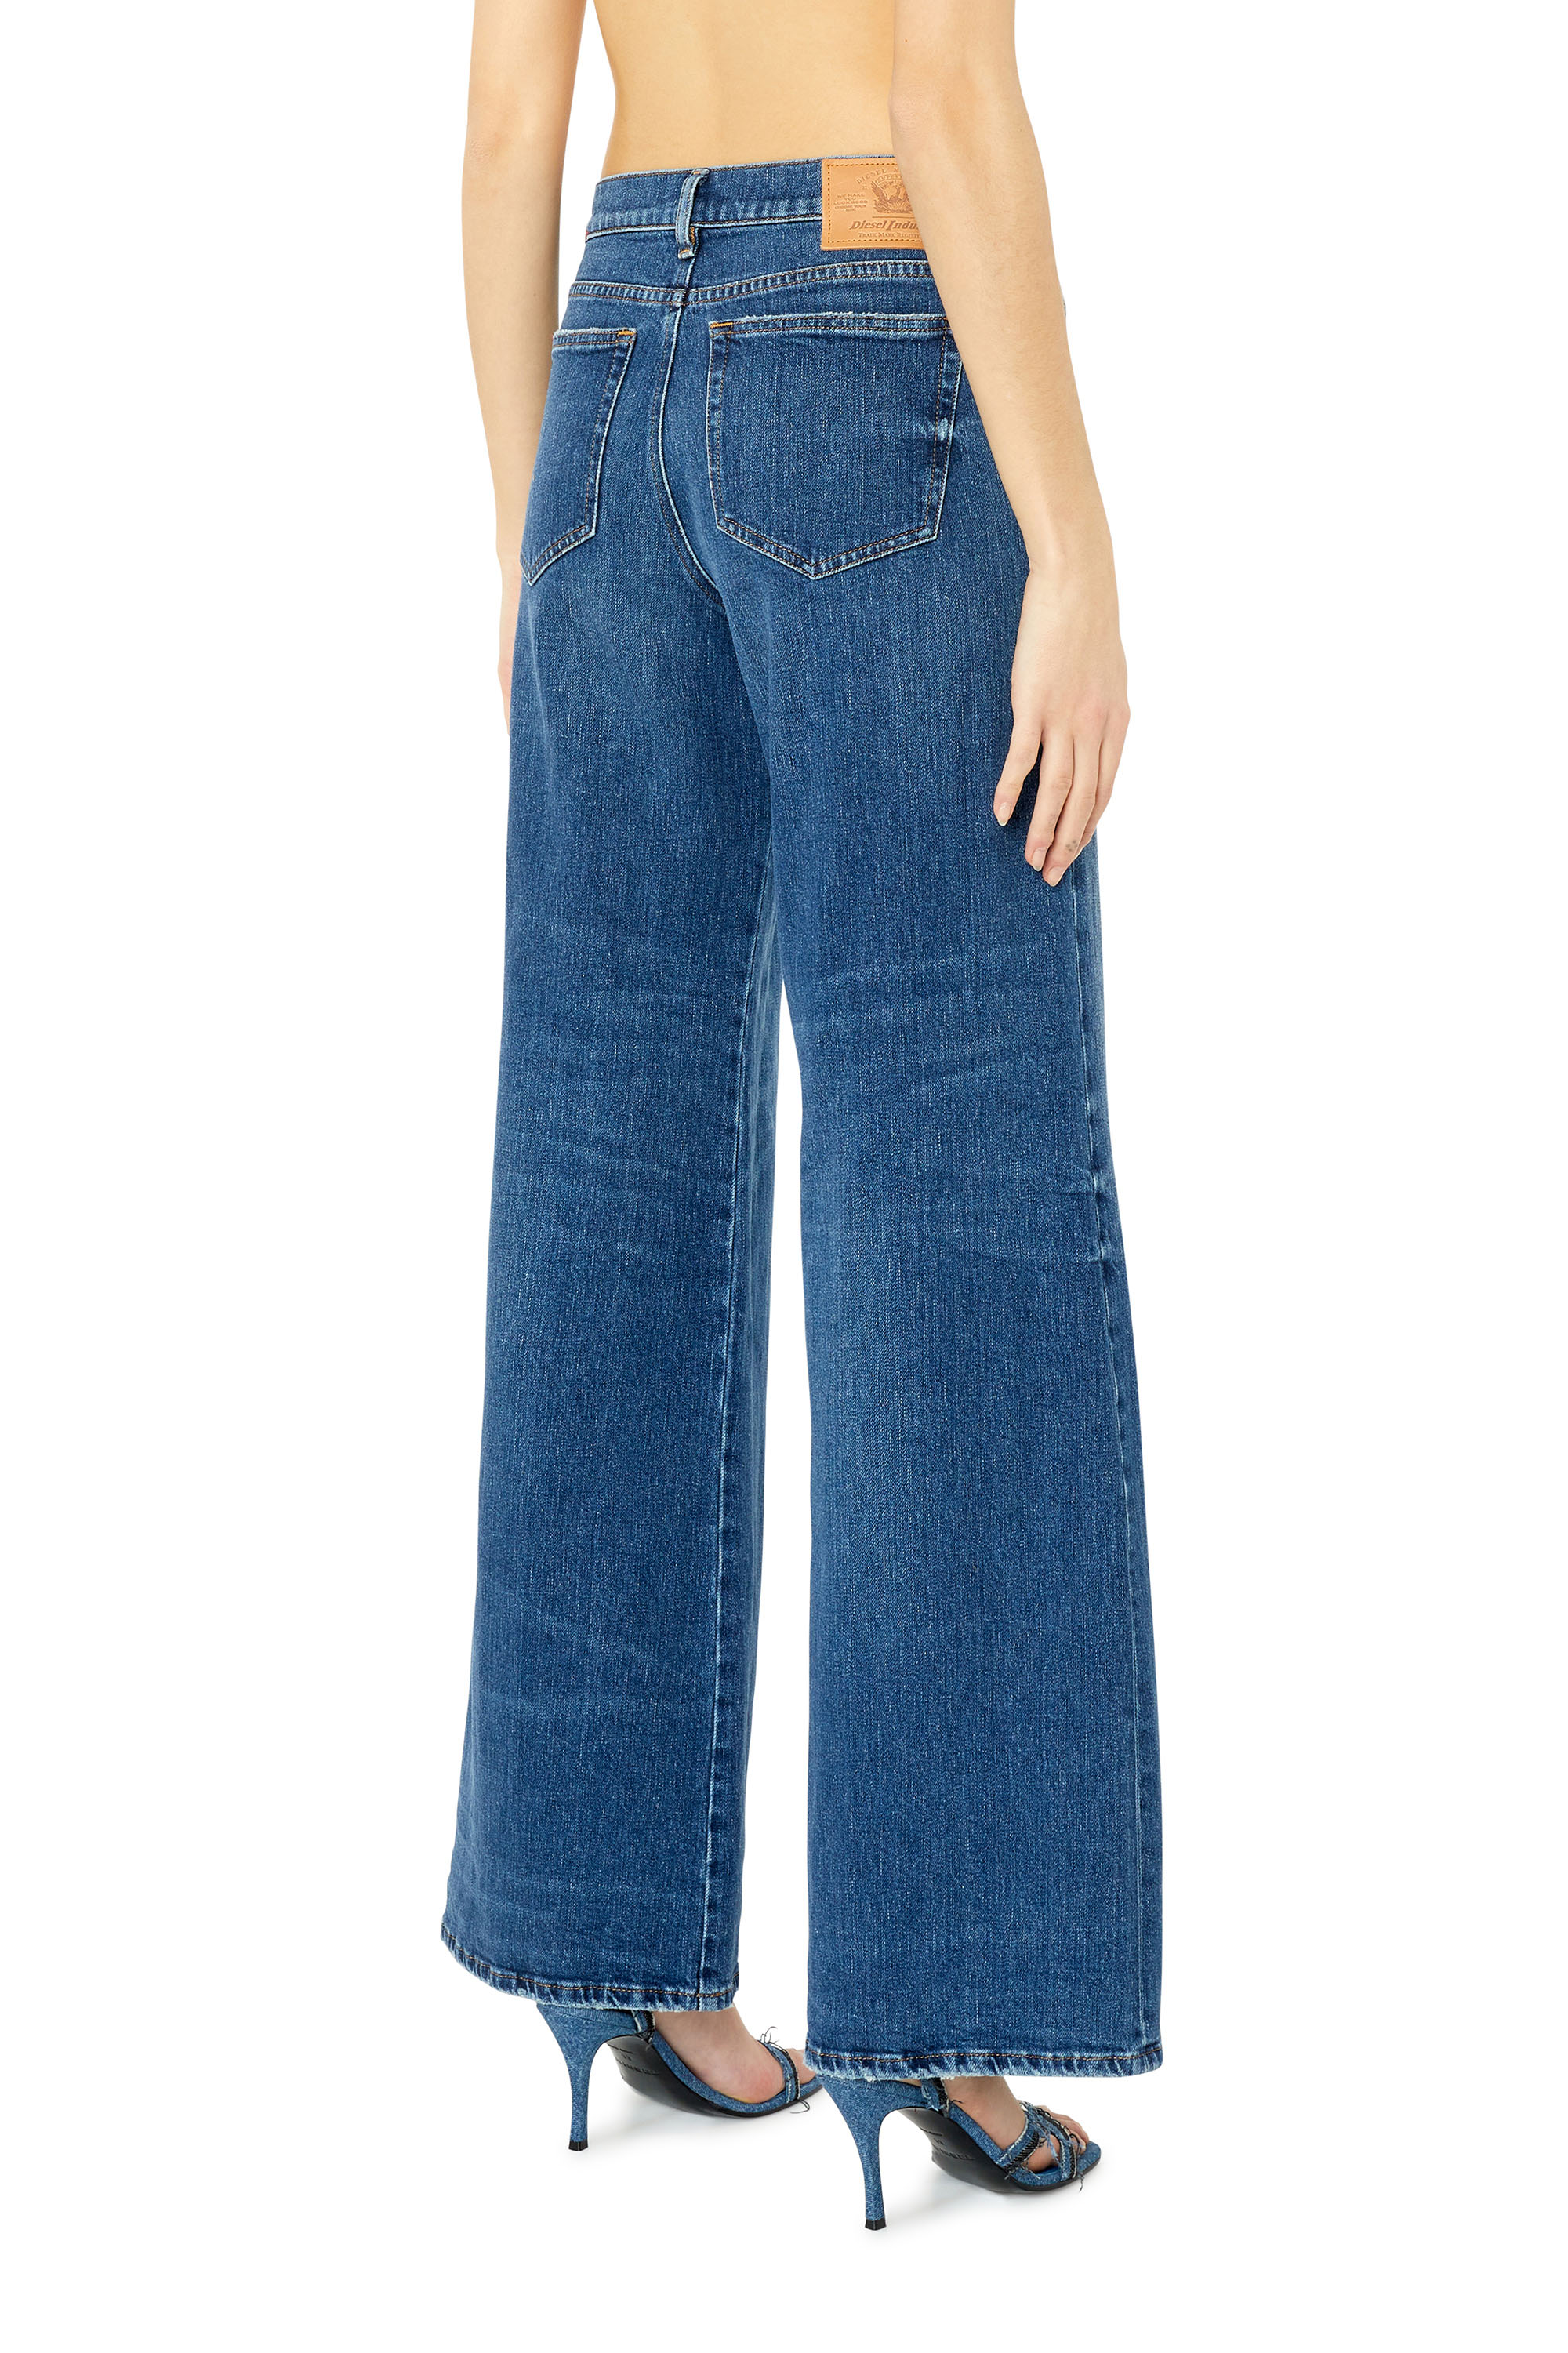 Bootcut and Flare Jeans 1978 D-Akemi 007L1 - デニム